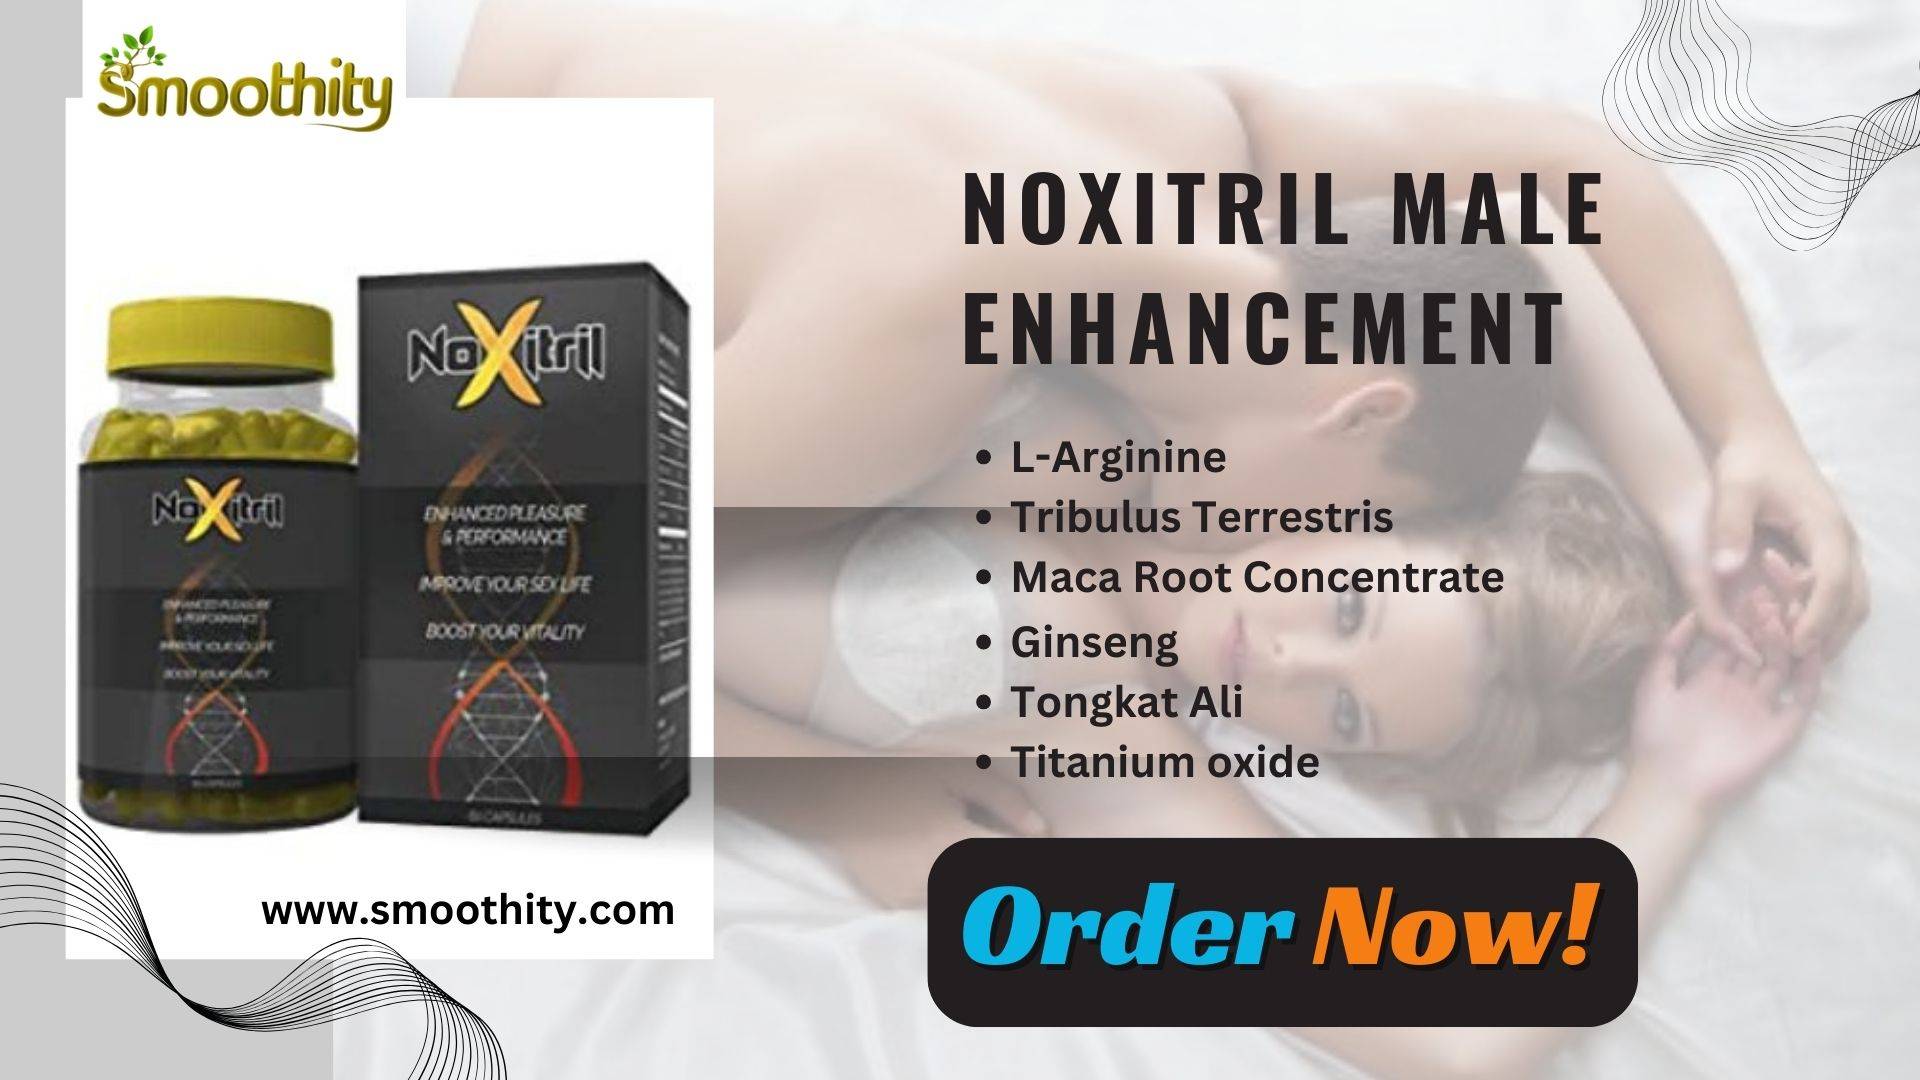 What are the ingredients in Noxitril Male Enhancement?